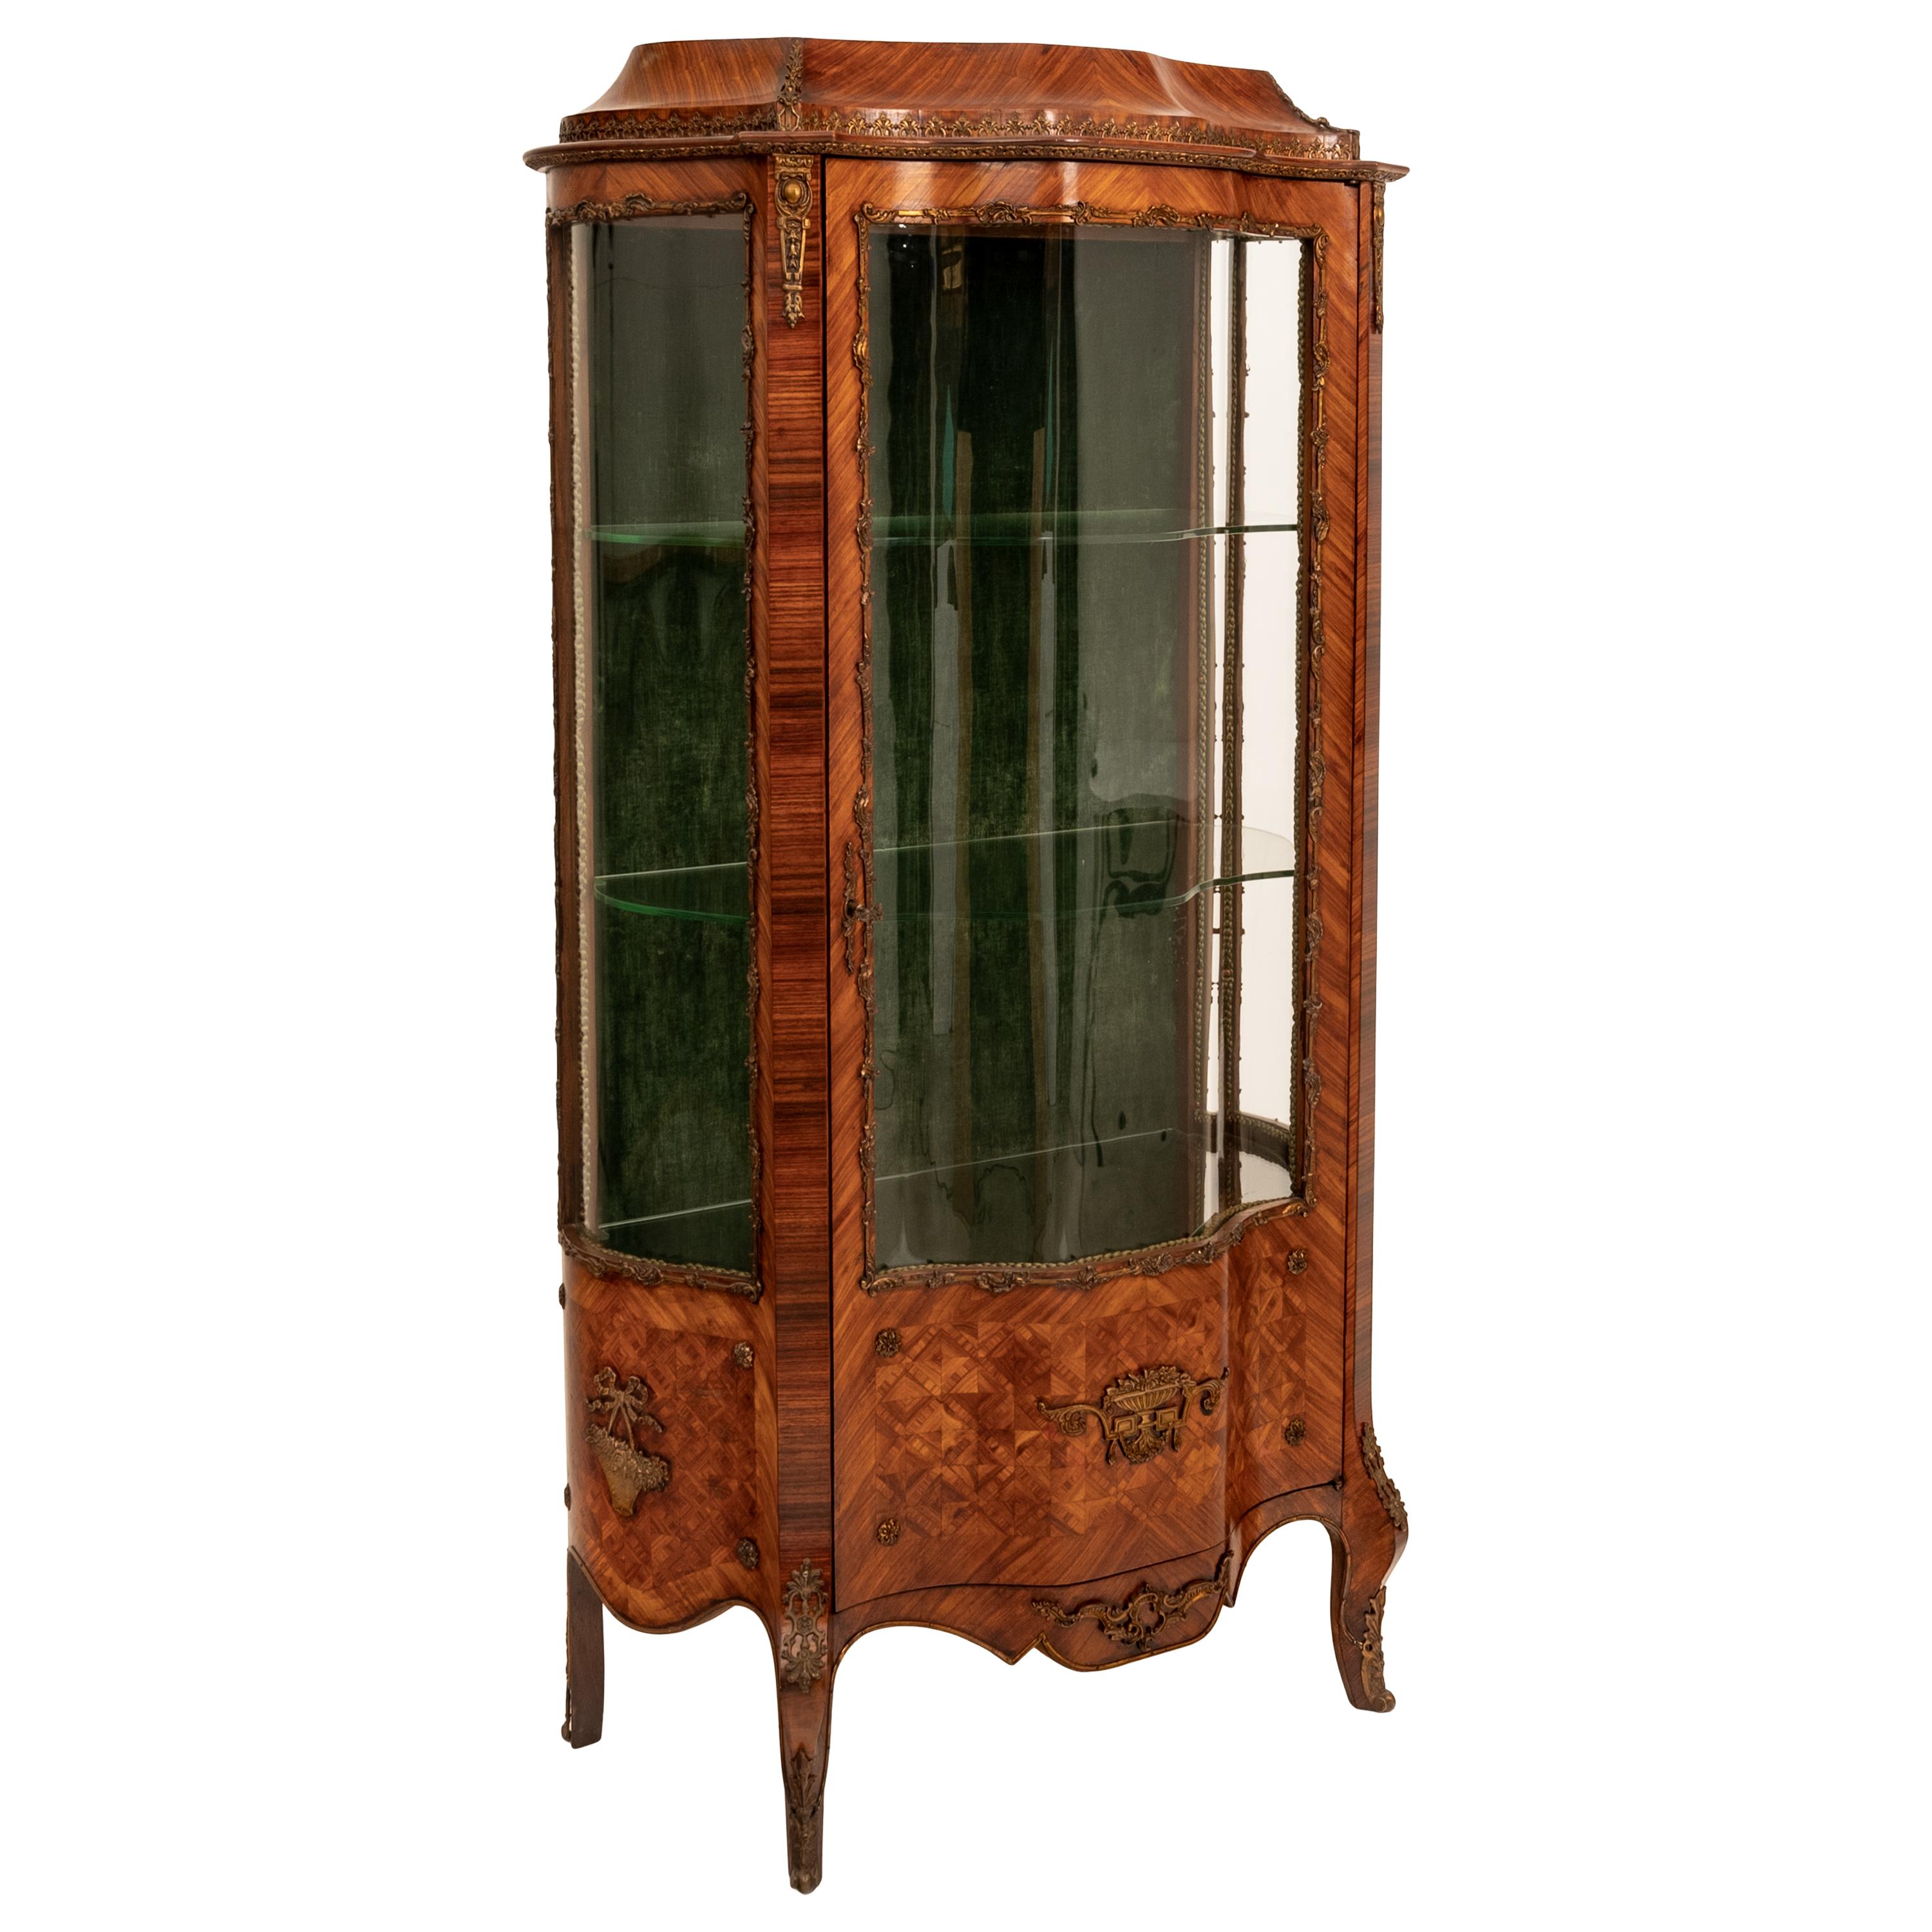 Fine Antique French Louis XV Kingwood Ormolu Bombe Shaped Marquetry Vitrine 1880 In Good Condition For Sale In Portland, OR